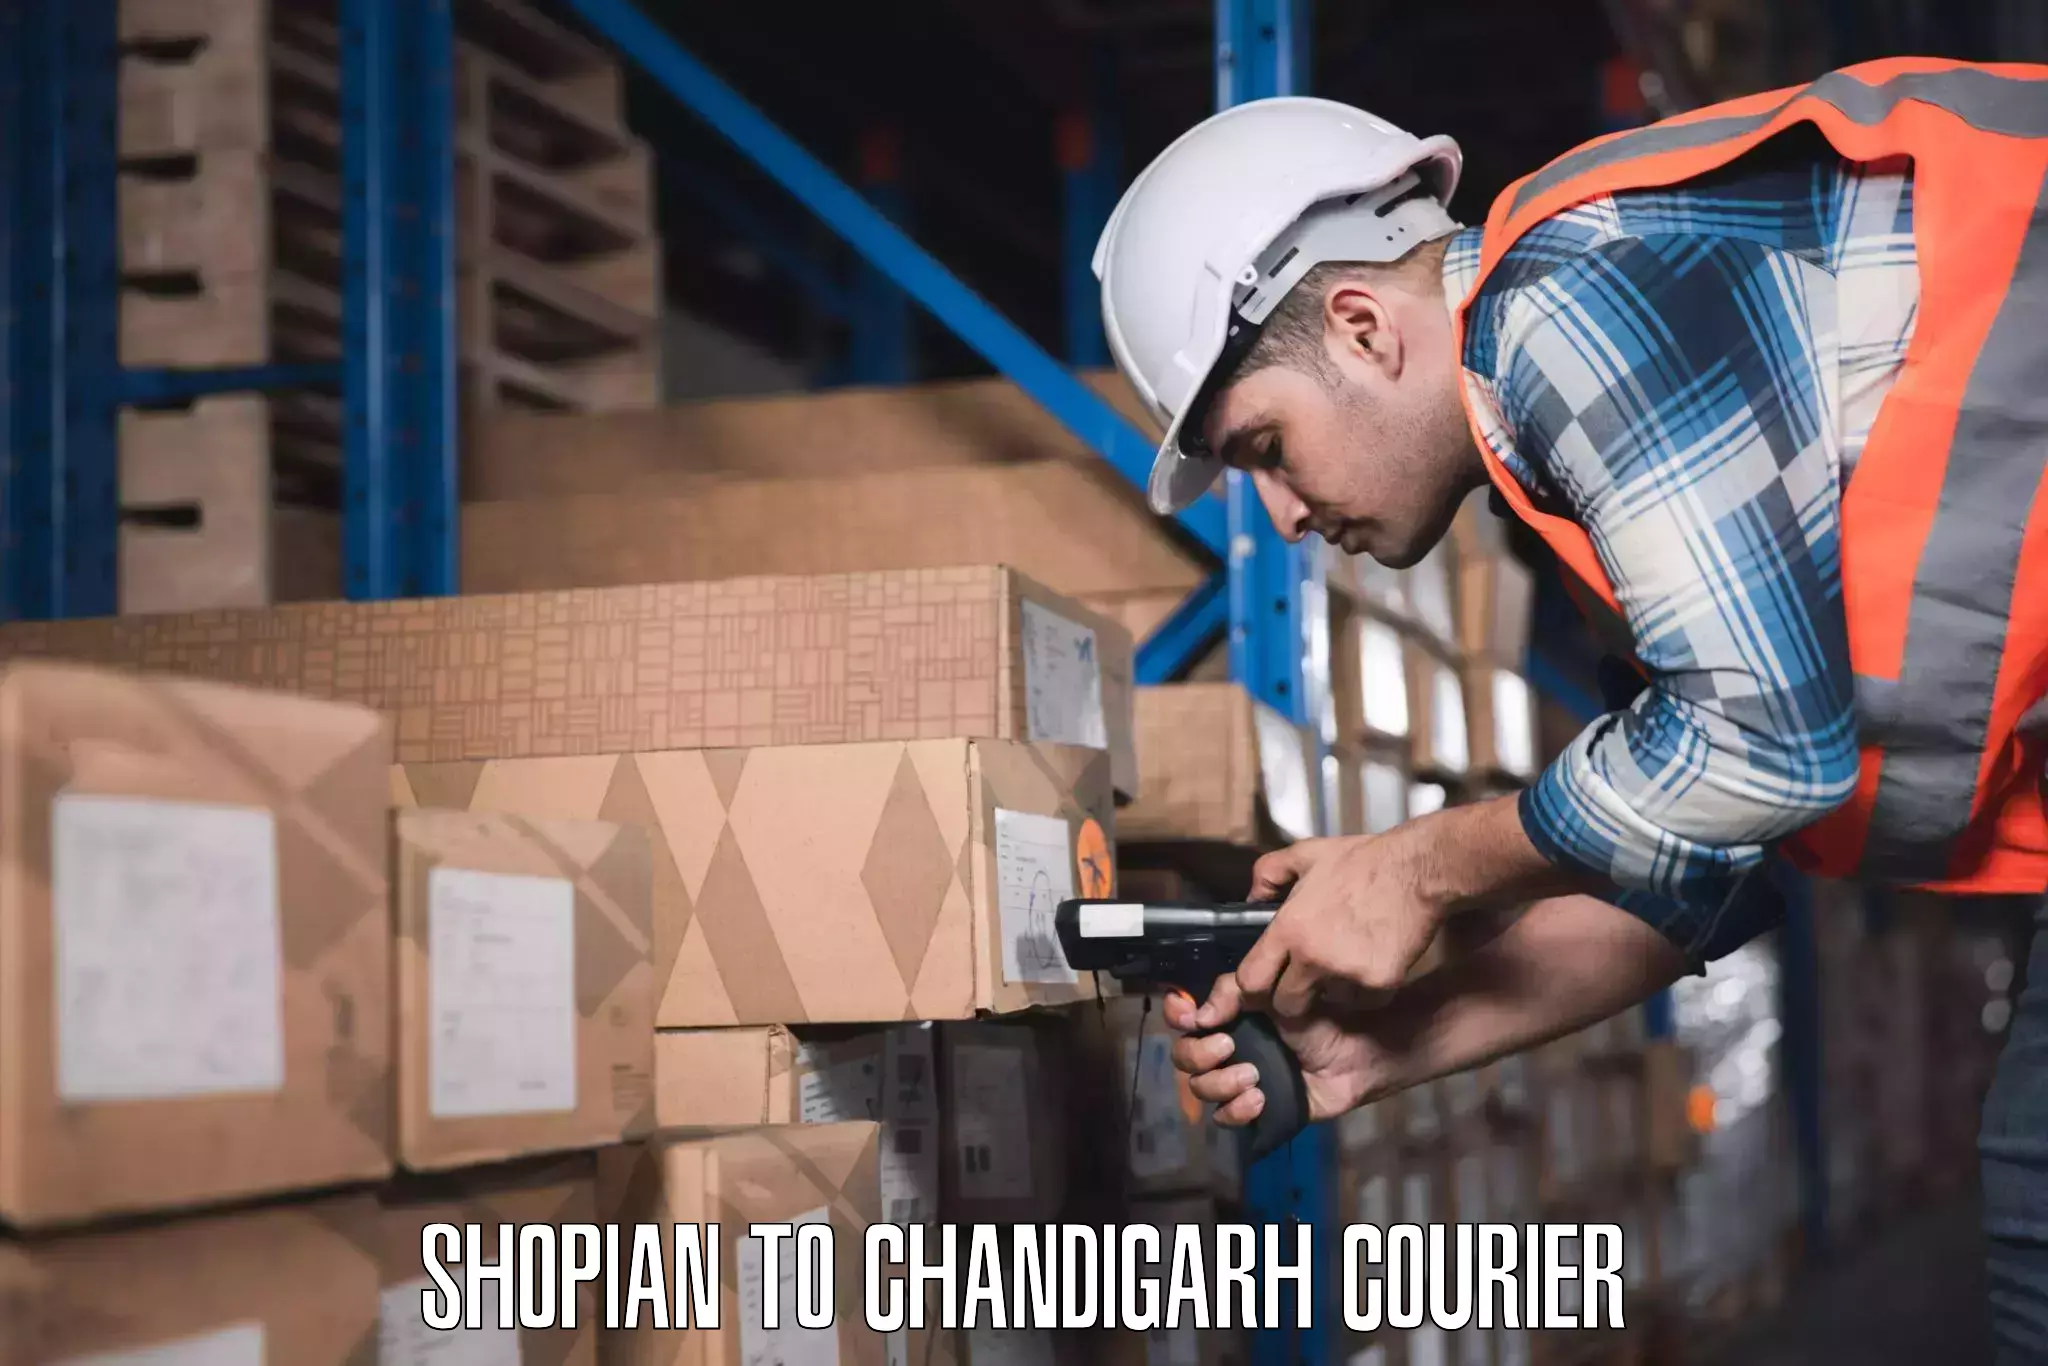 Luggage shipment specialists Shopian to Chandigarh